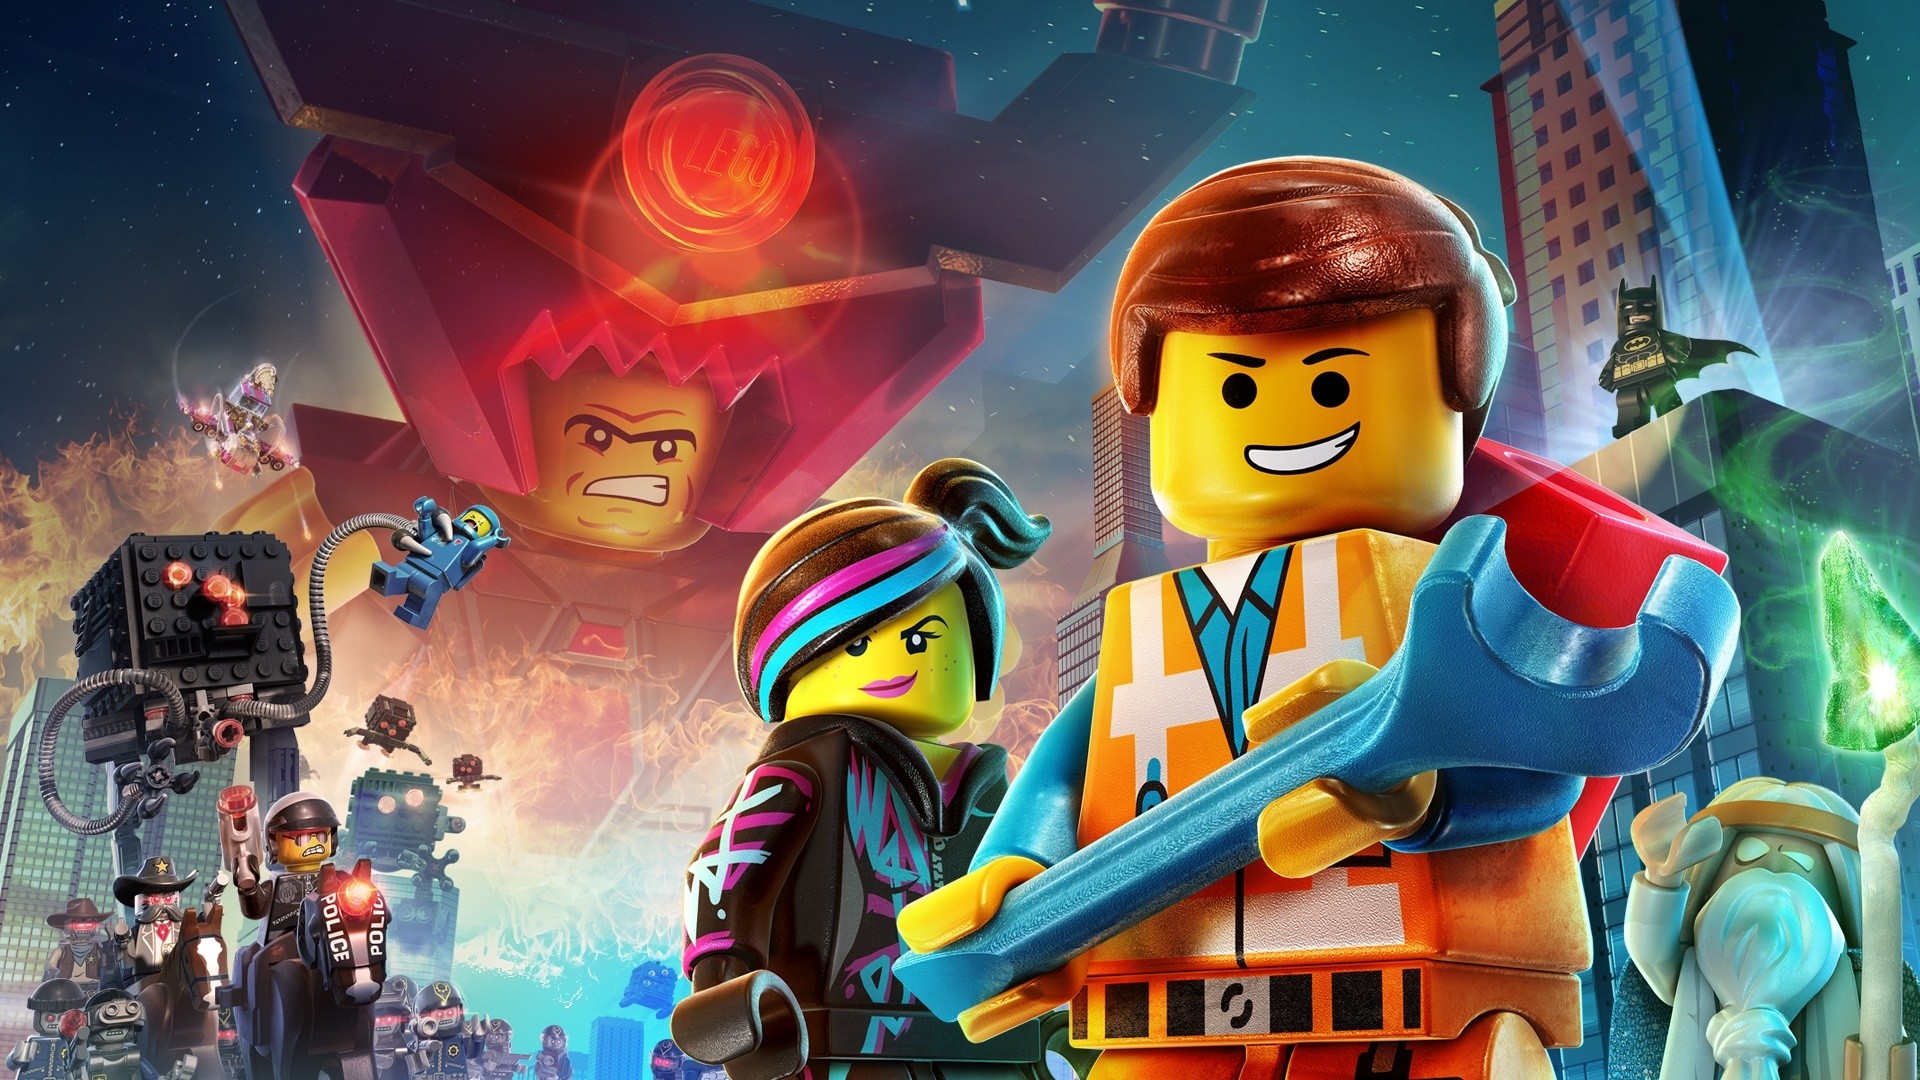 1920x1080 The Lego Movie Wallpapers & Desktop Backgrounds